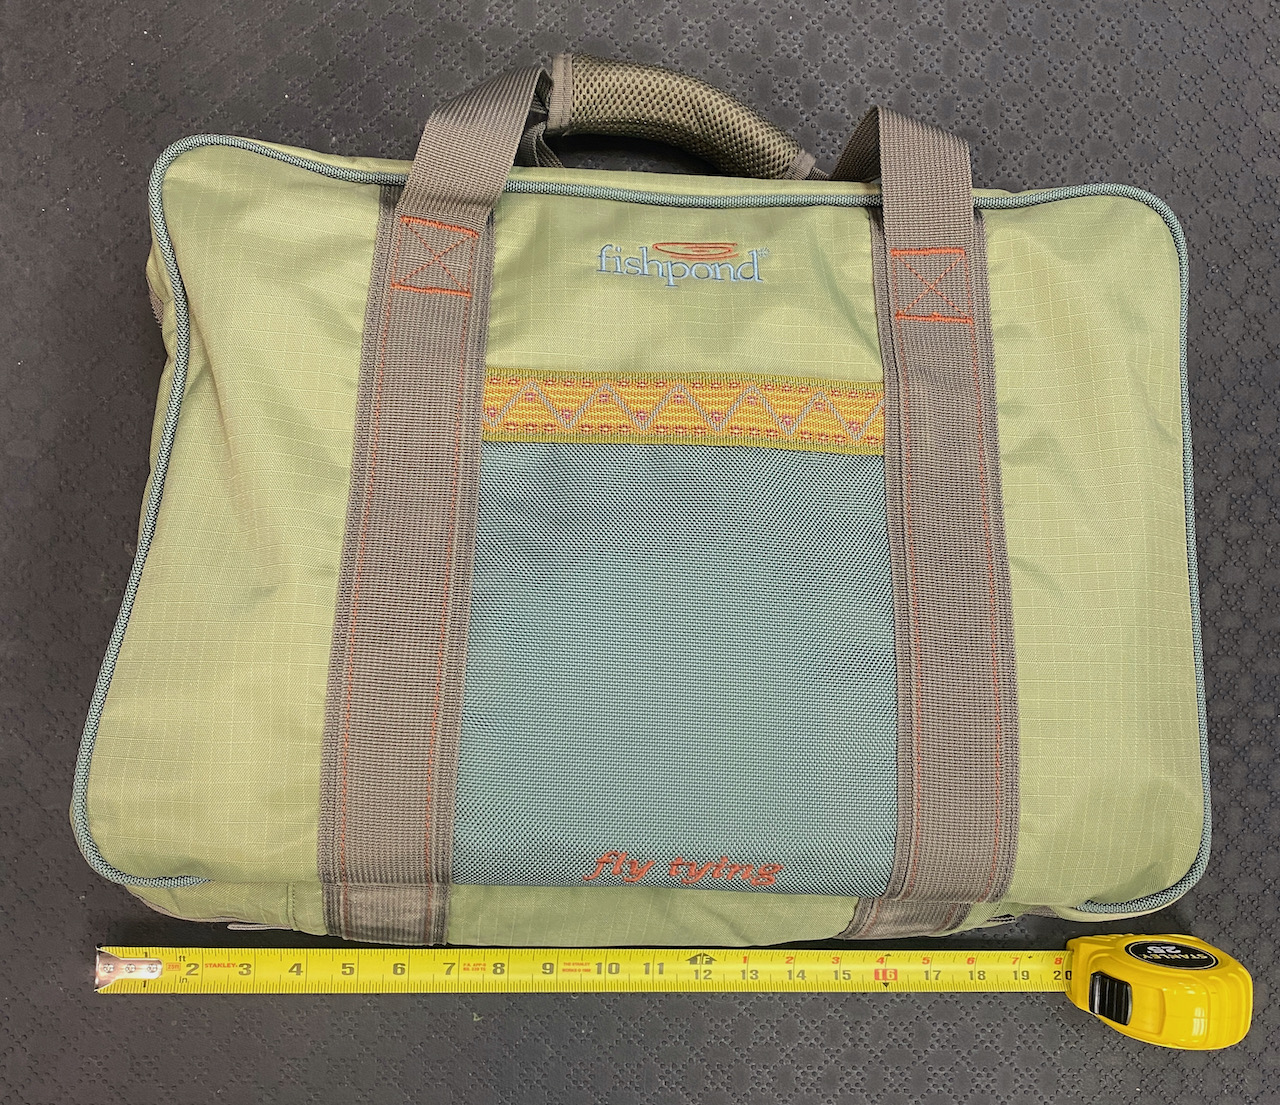 SOLD! – NEW PRICE! – Fishpond Tomahawk Fly Tying Kit Case Aspen Green Bag –  LIKE NEW! – WAS $150 – NOW $100 – The First Cast – Hook, Line and Sinker's  Fly Fishing Shop